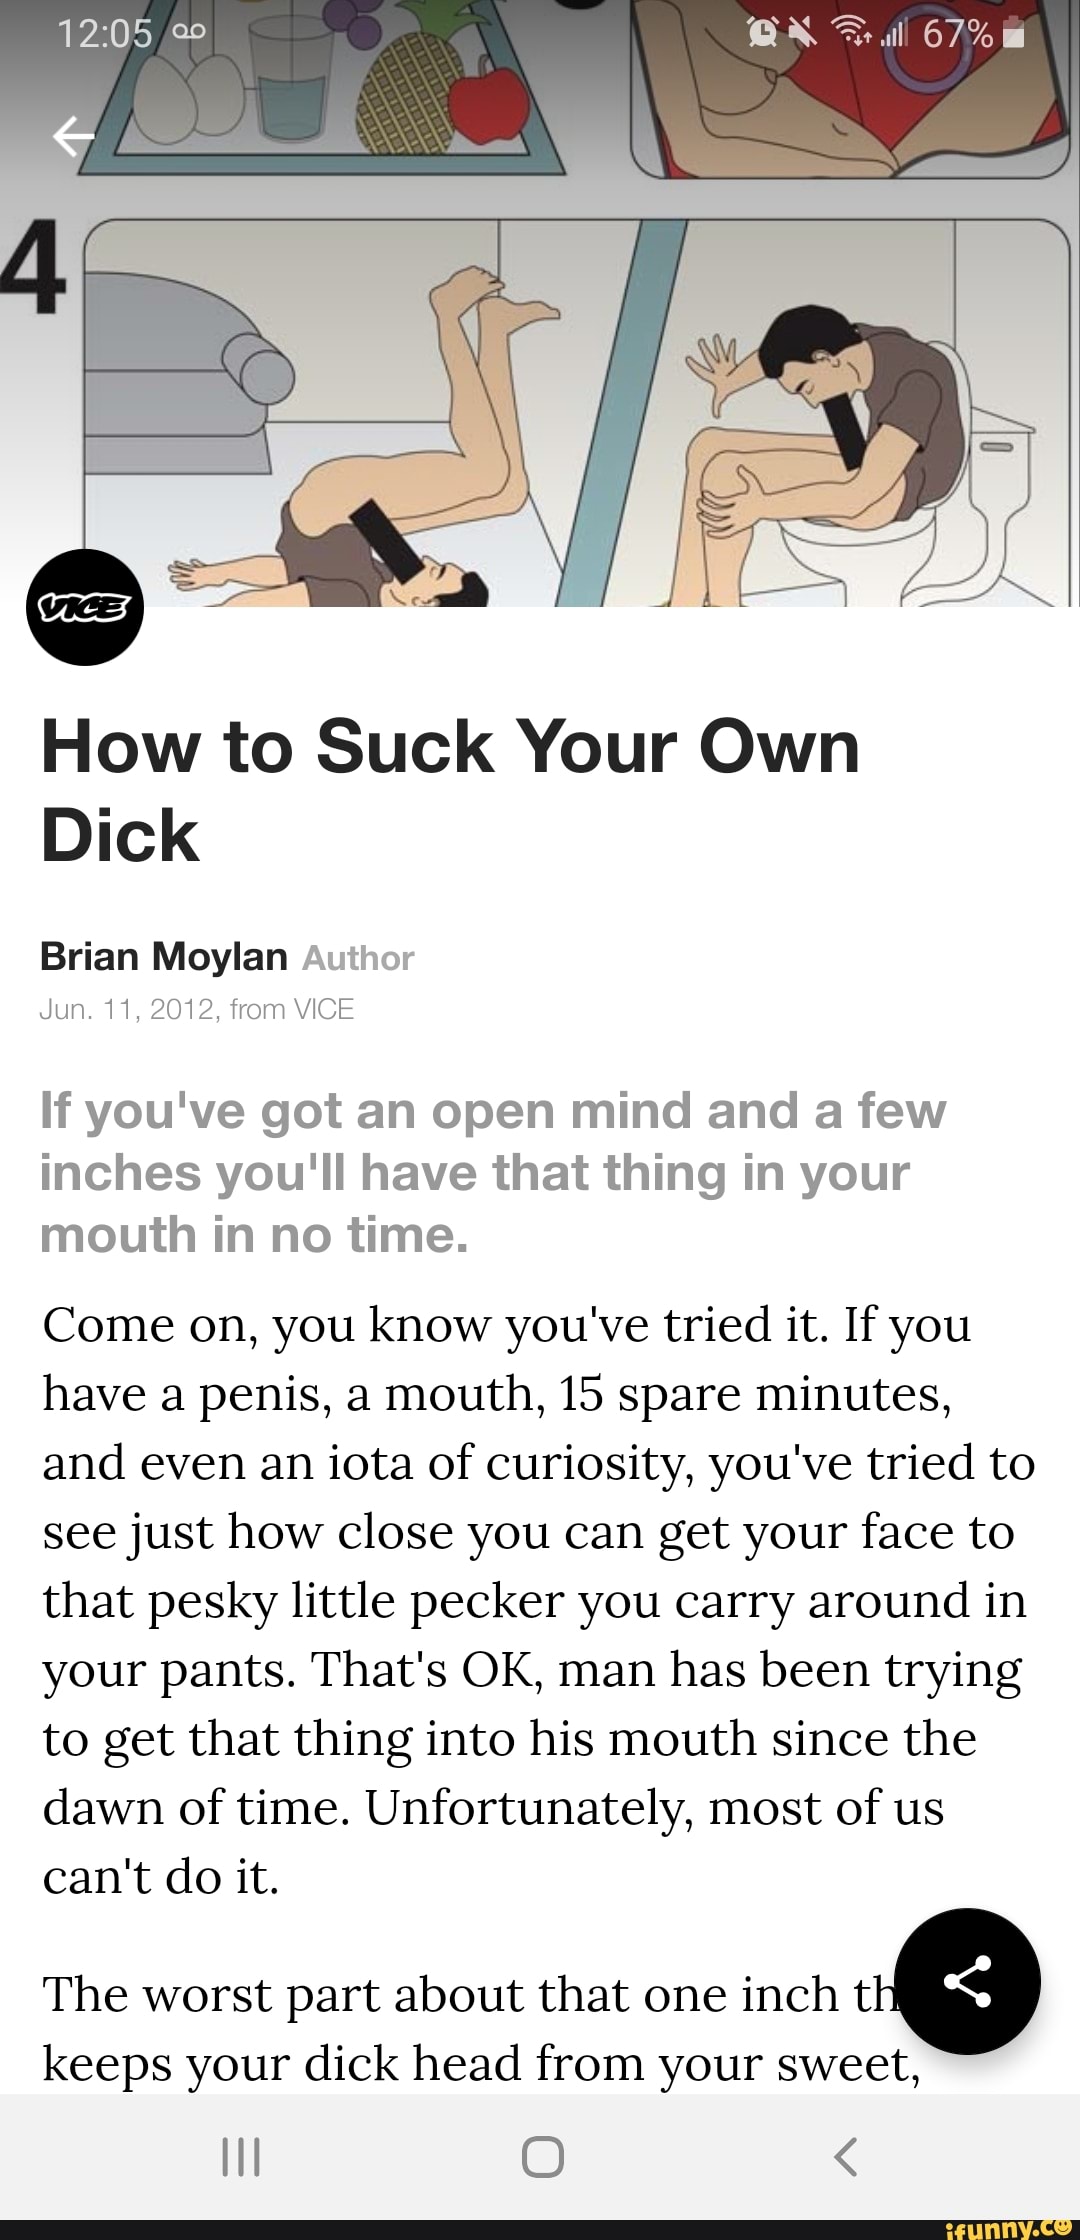 How many men can suck their own dick